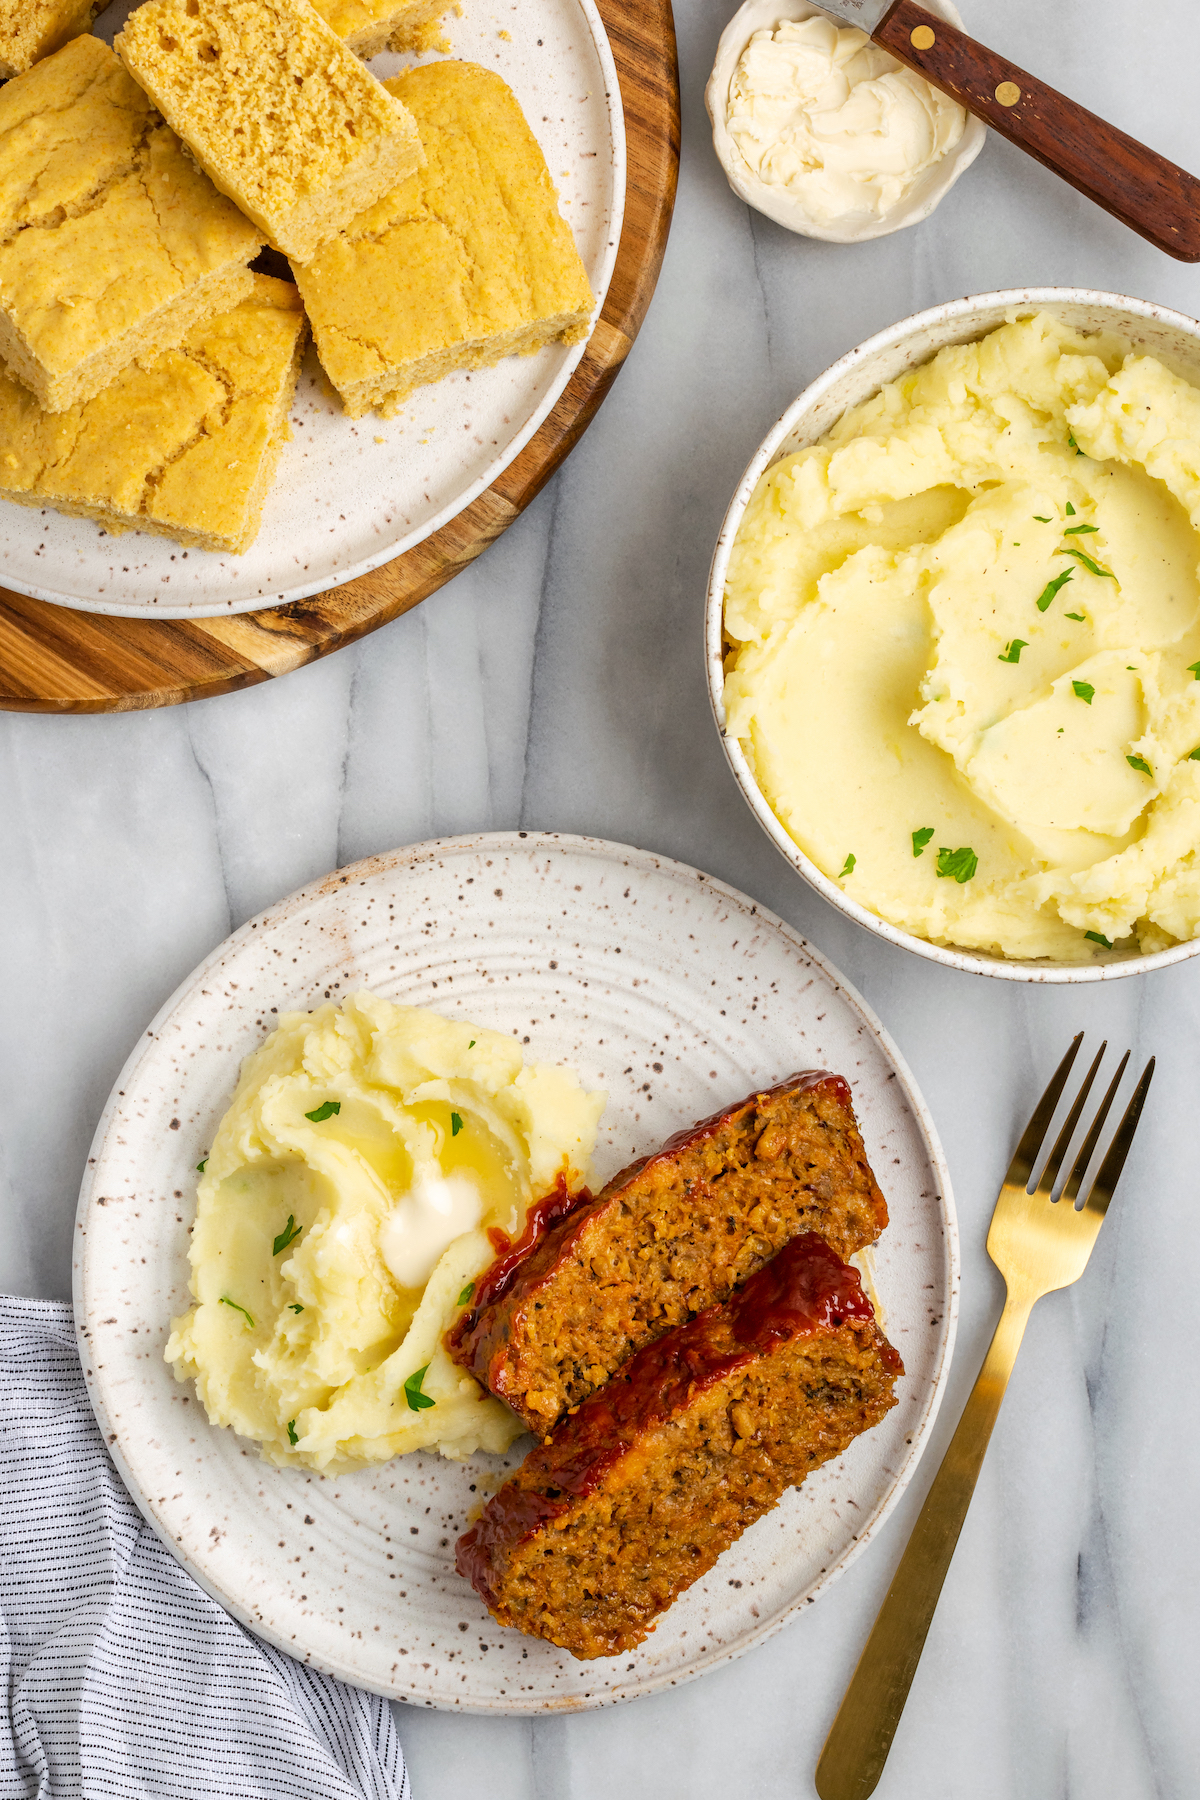 Vegan Southern meatloaf on plate with mashed potatoes